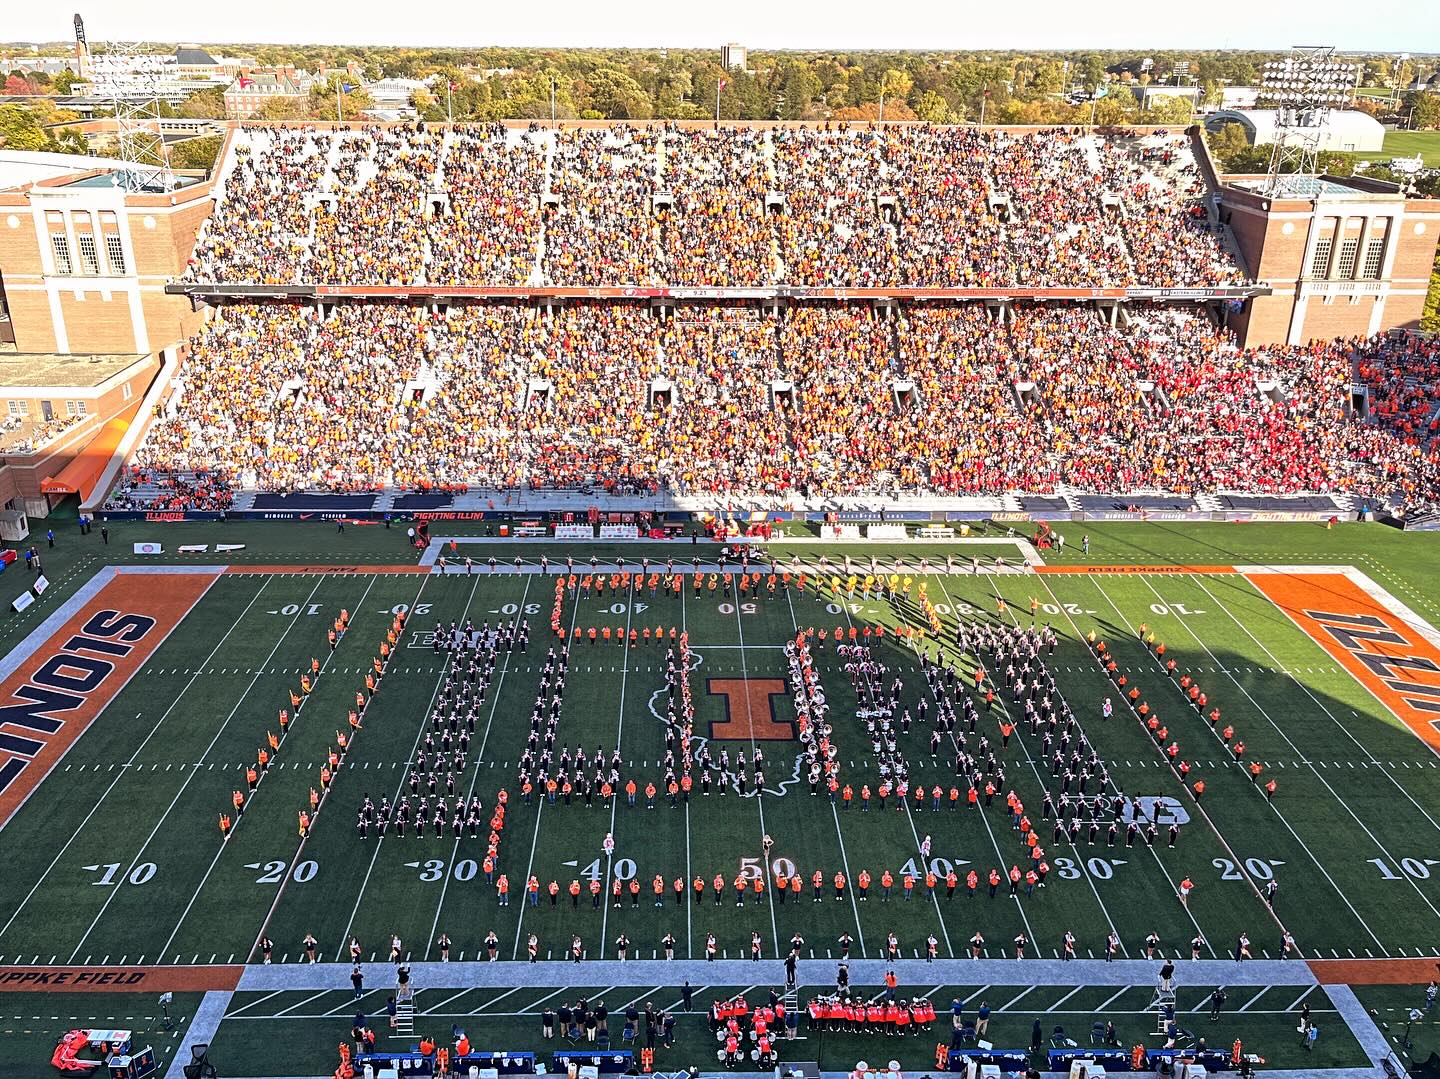 View of Zuppke Field at Memorial Stadium, University of Illinois. The Marching Illini band is in a block-I formation on the field. Most of the field is cast in shadow. The stands are full of spectators.